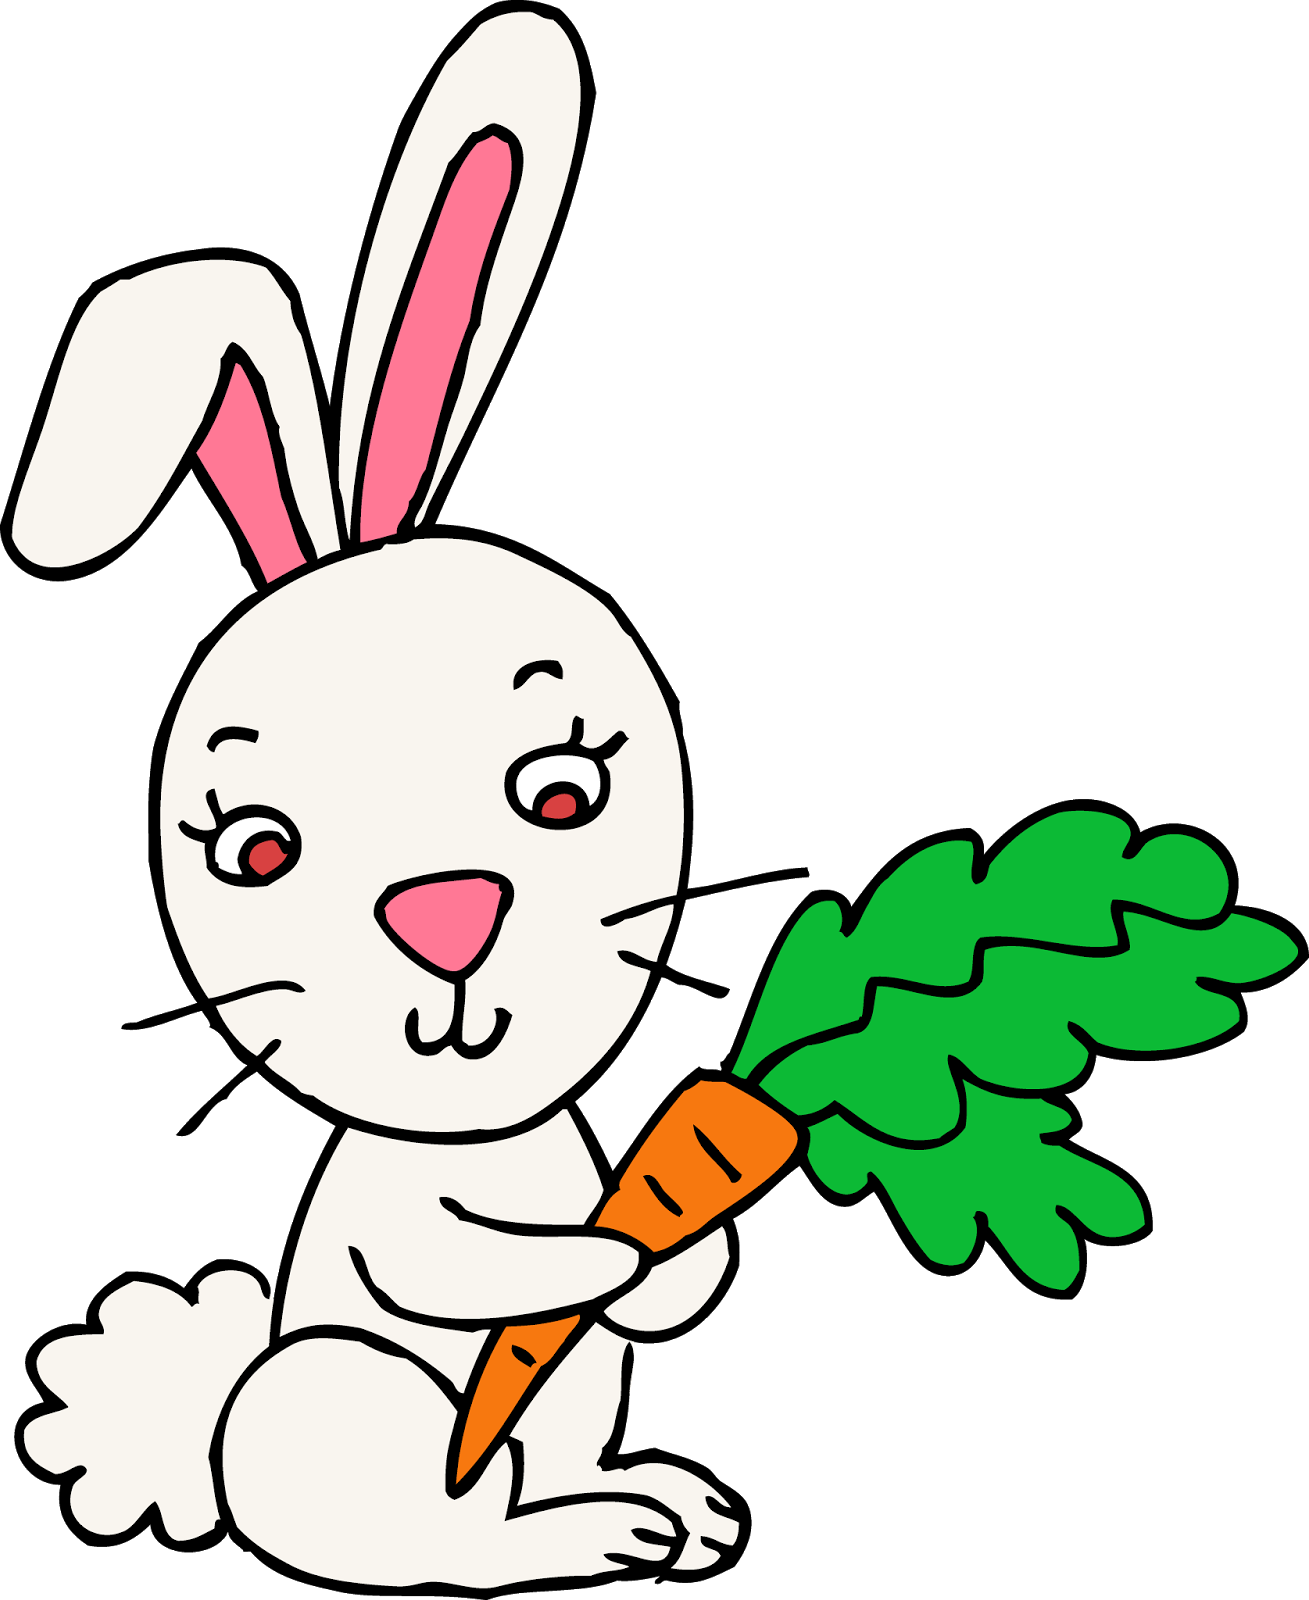 1000+ images about Easter Bunny Clip Arts | Fantasy ...